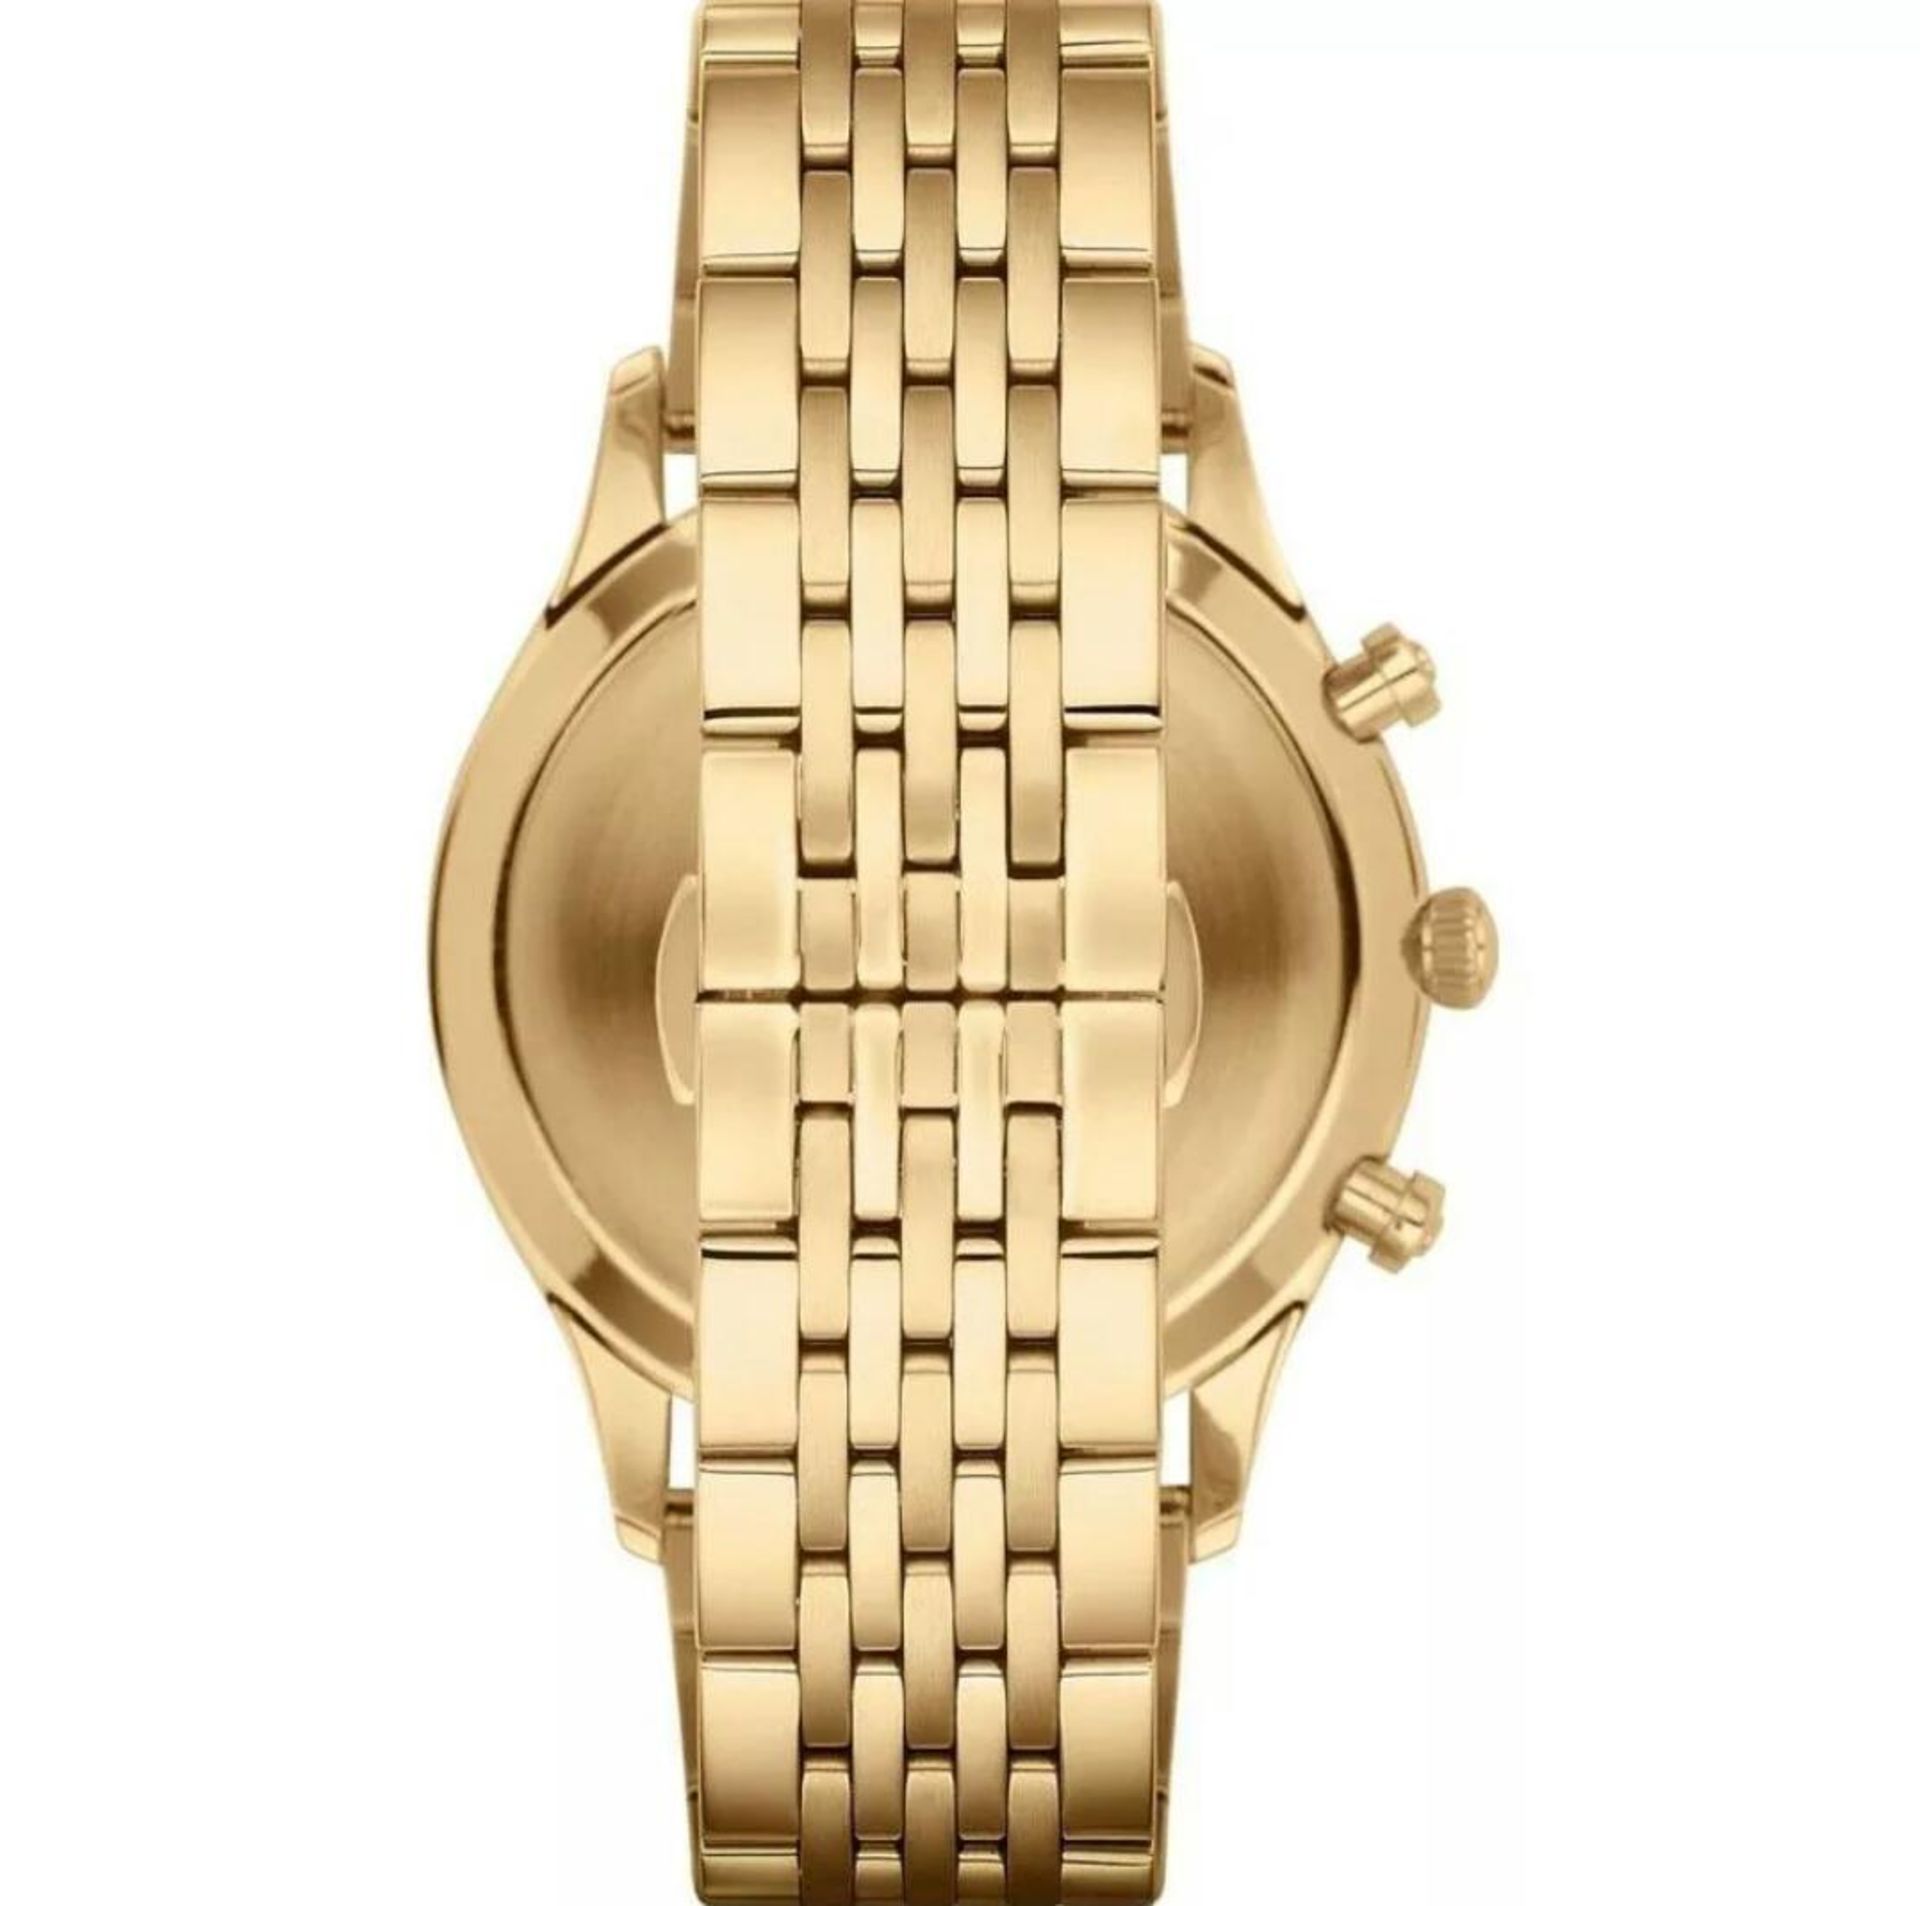 BRAND NEW GENTS EMPORIO ARMANI AR1893, GOLD TONE BRACELET WATCH, COMPLETE WITH ORIGINAL ARMANI WATCH - Image 2 of 2